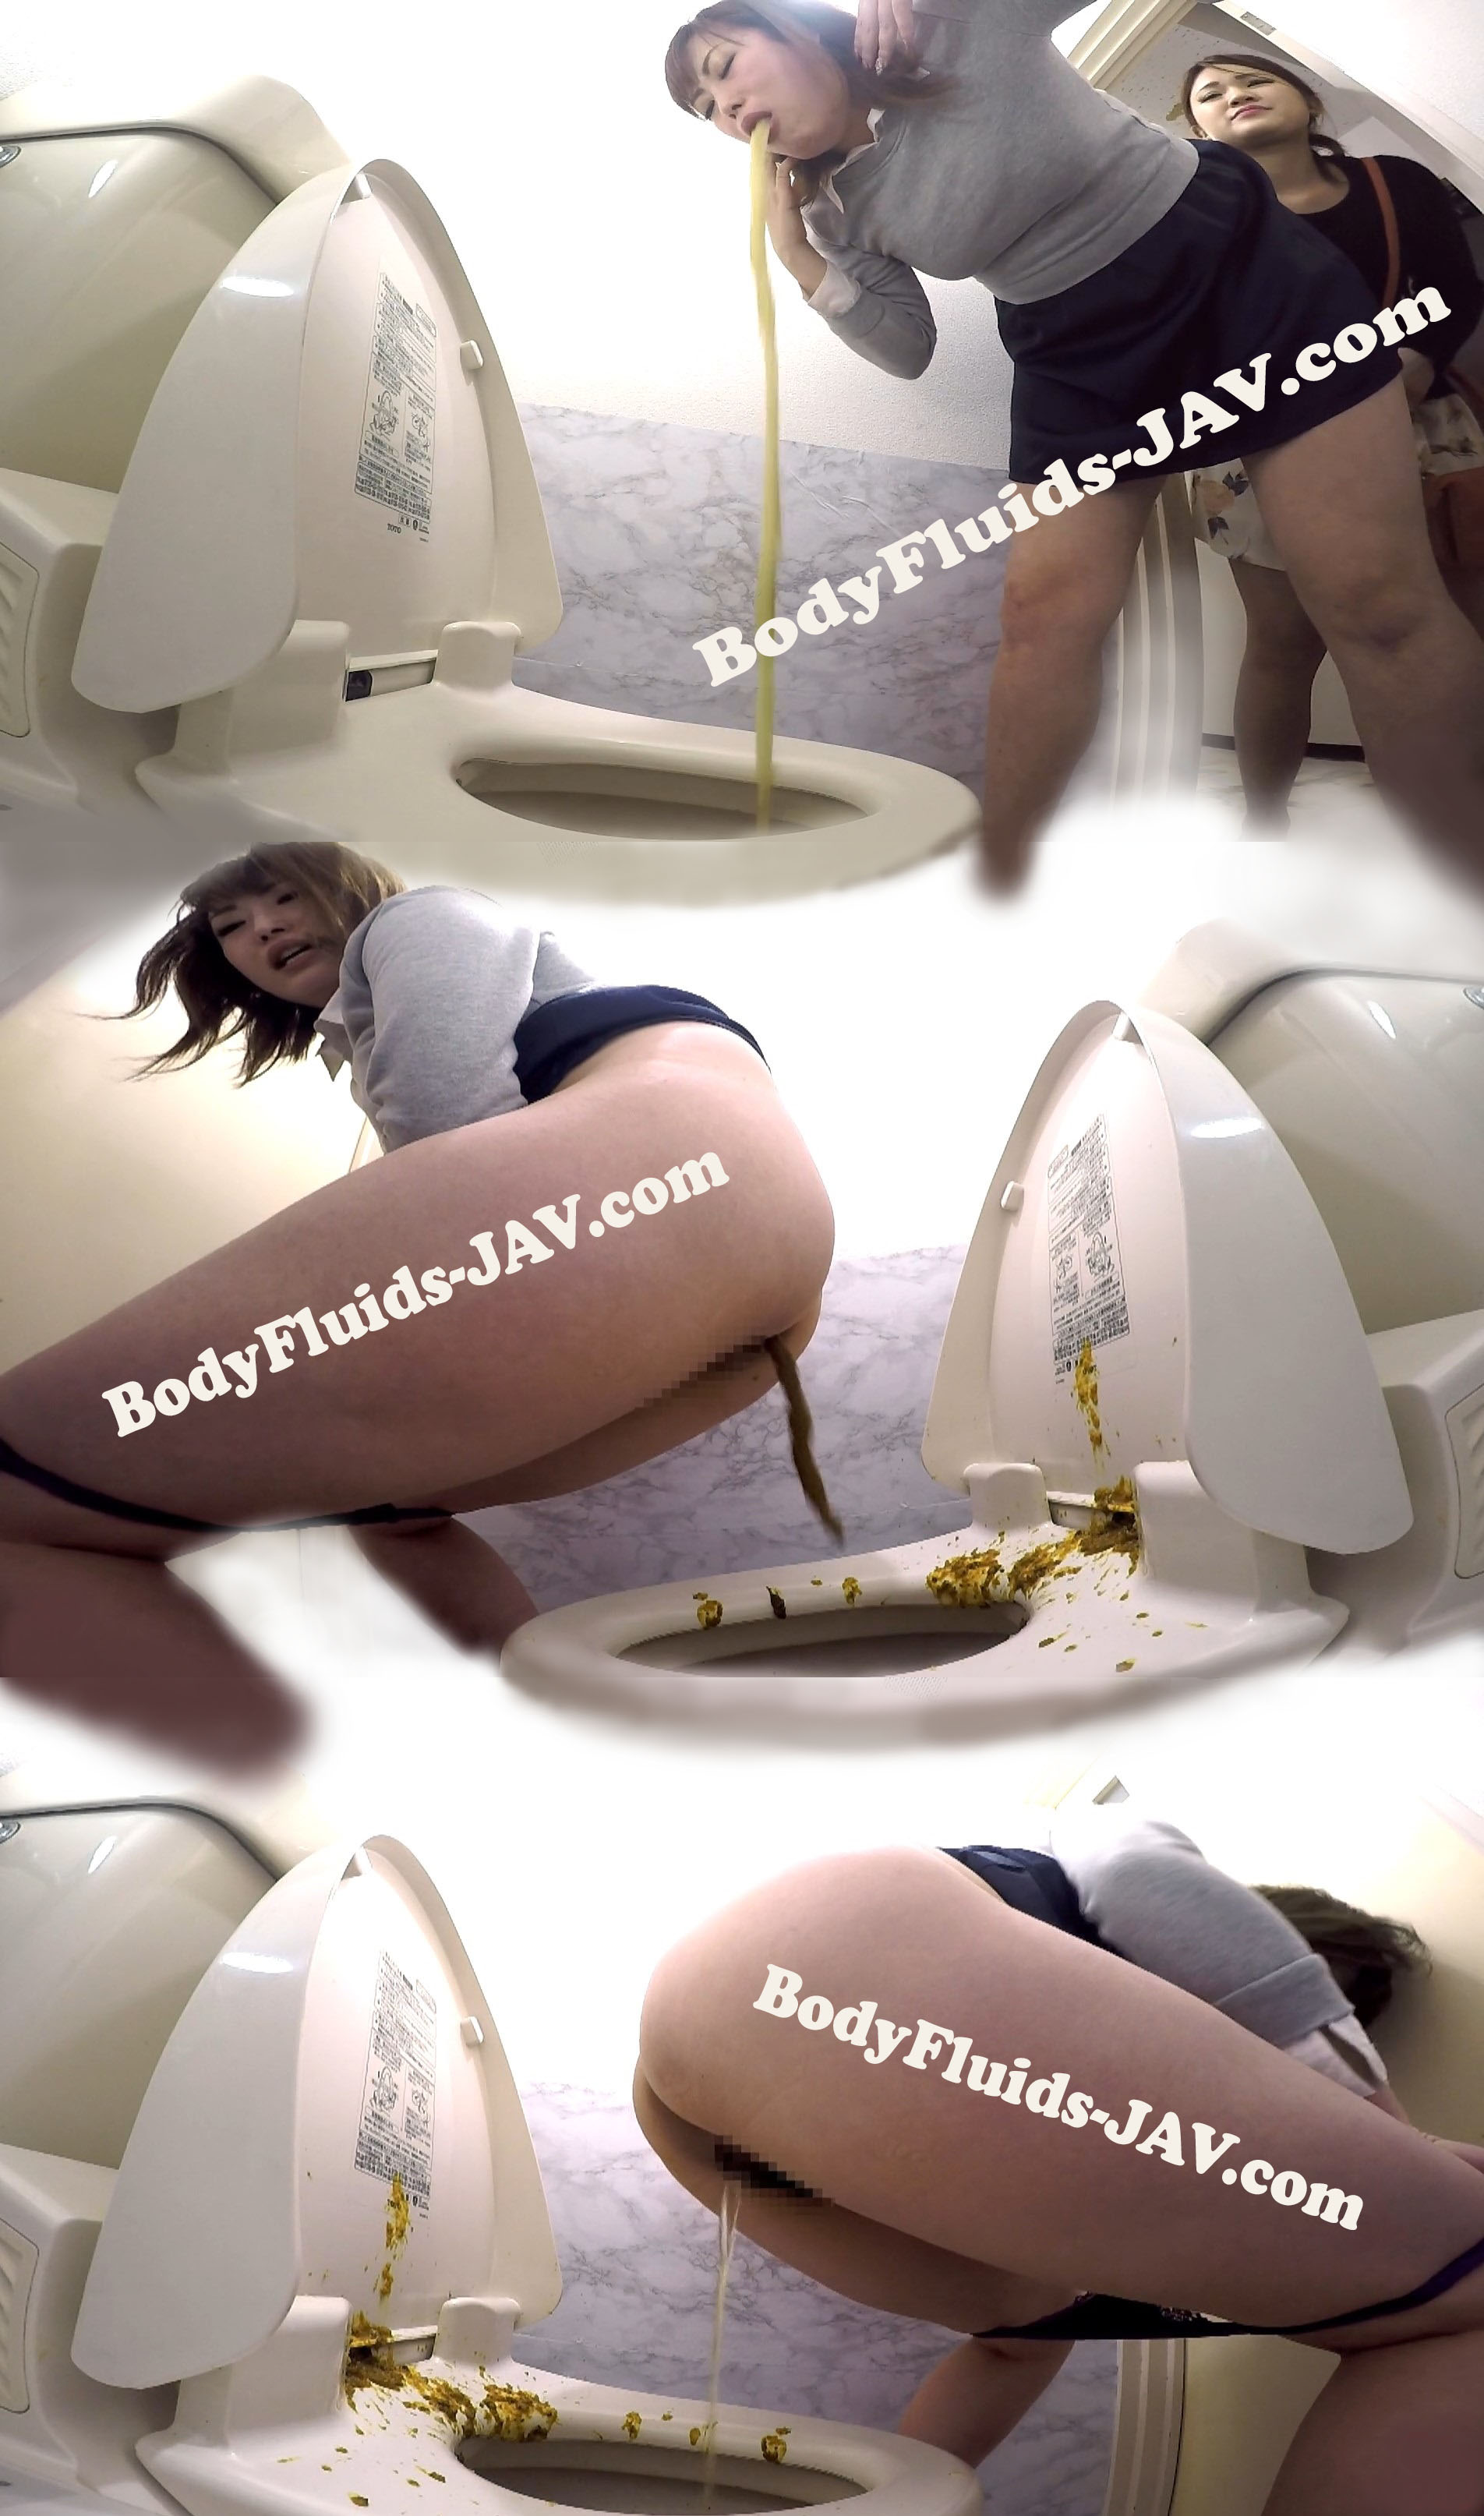 BFFF-236 Virtual Food Poisoning Defecates Past the Toilet HD